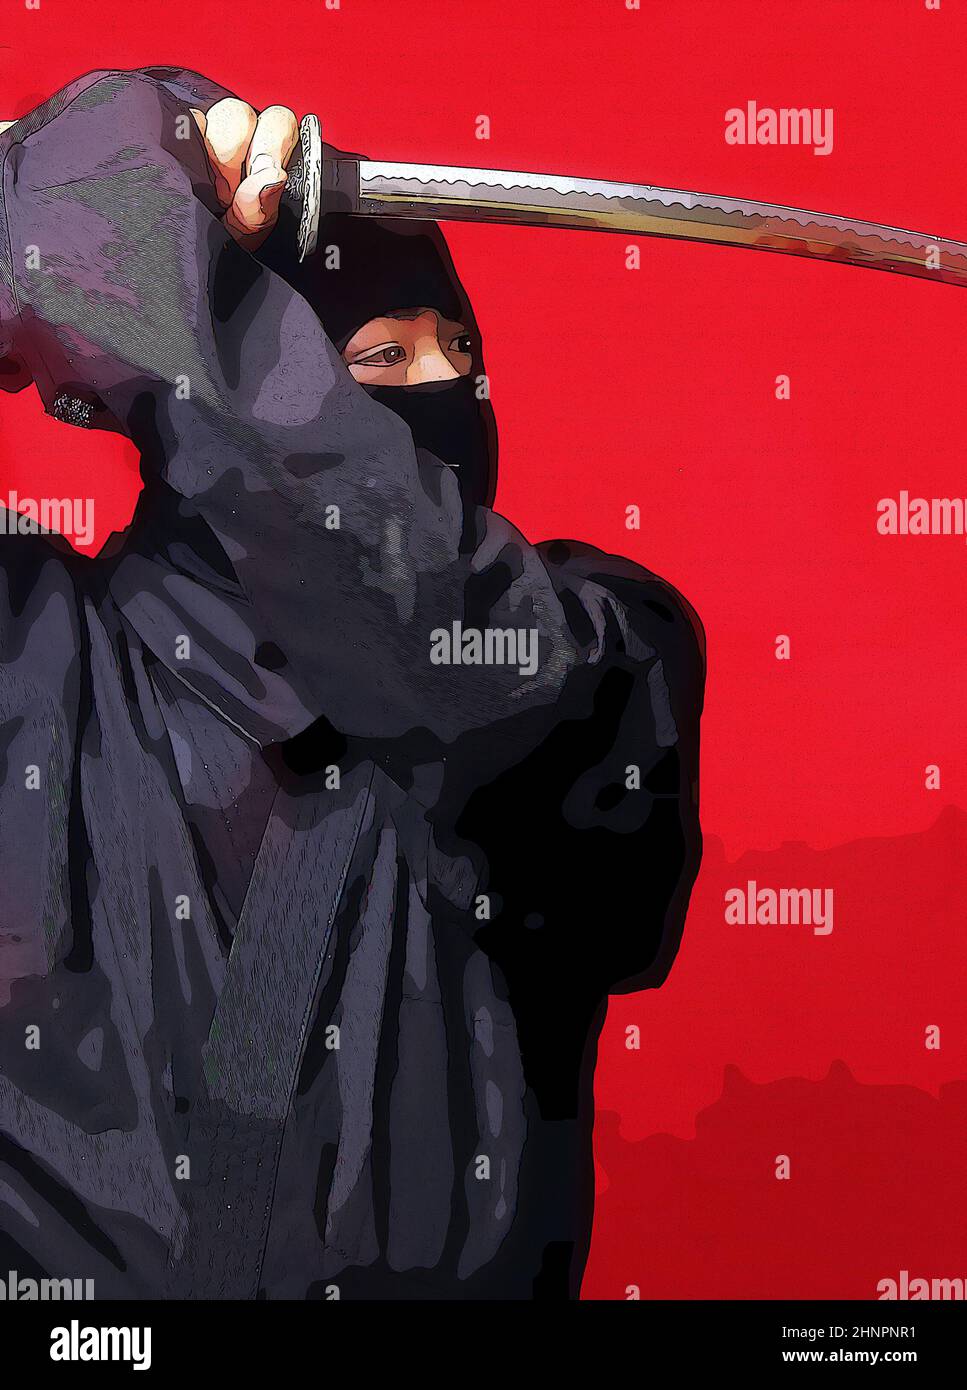 Ninja With Throwing Star Weapon and Red Background Stock Photo